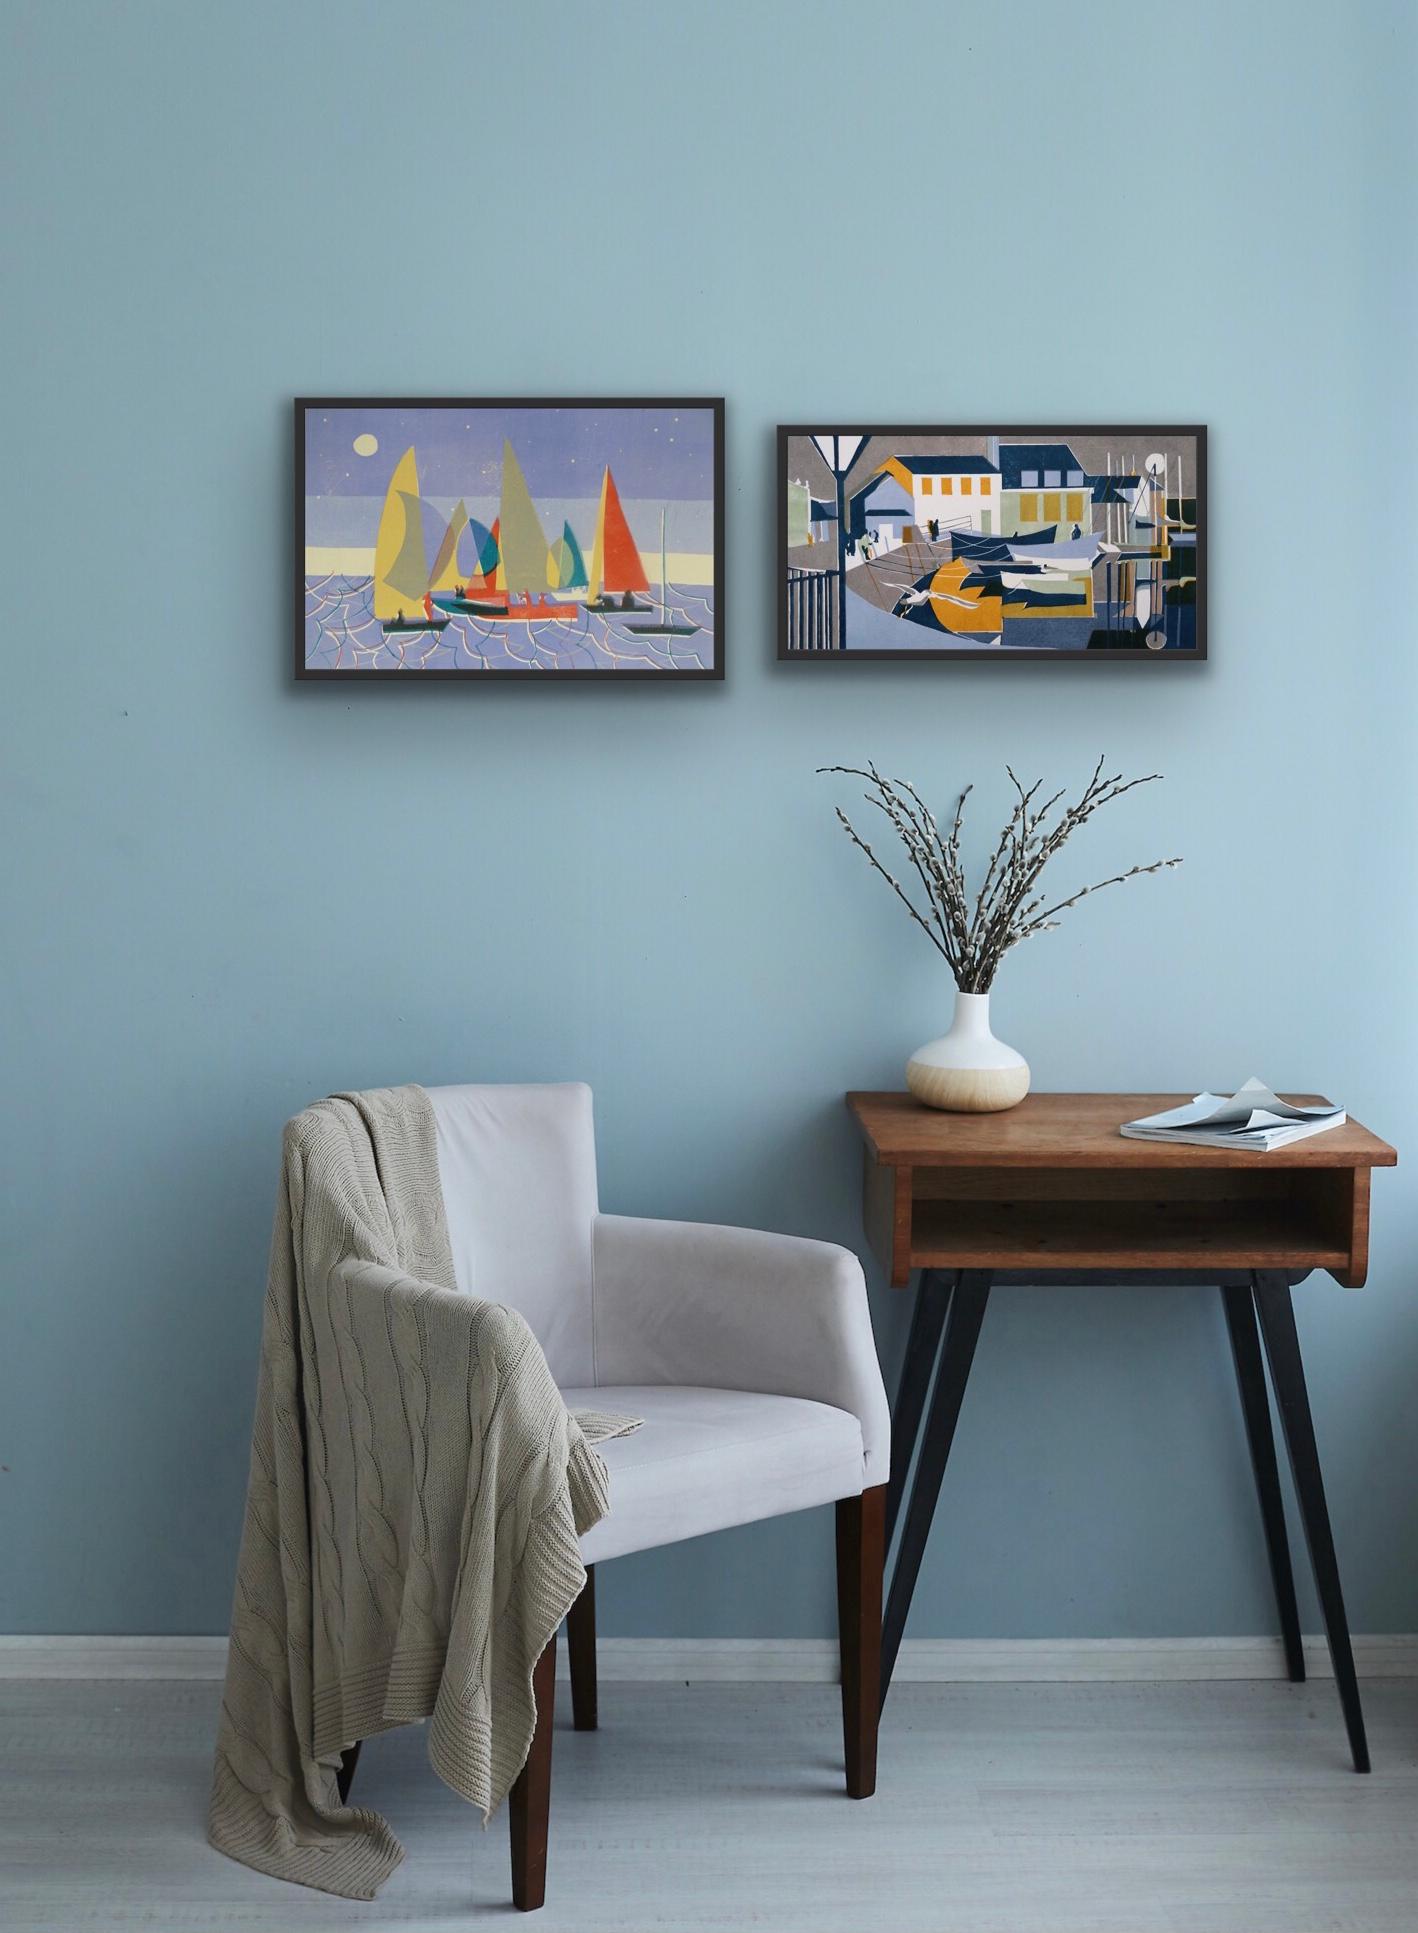 Memories of Padstow and Sailing at Dusk diptych - Print by Lisa Takahashi